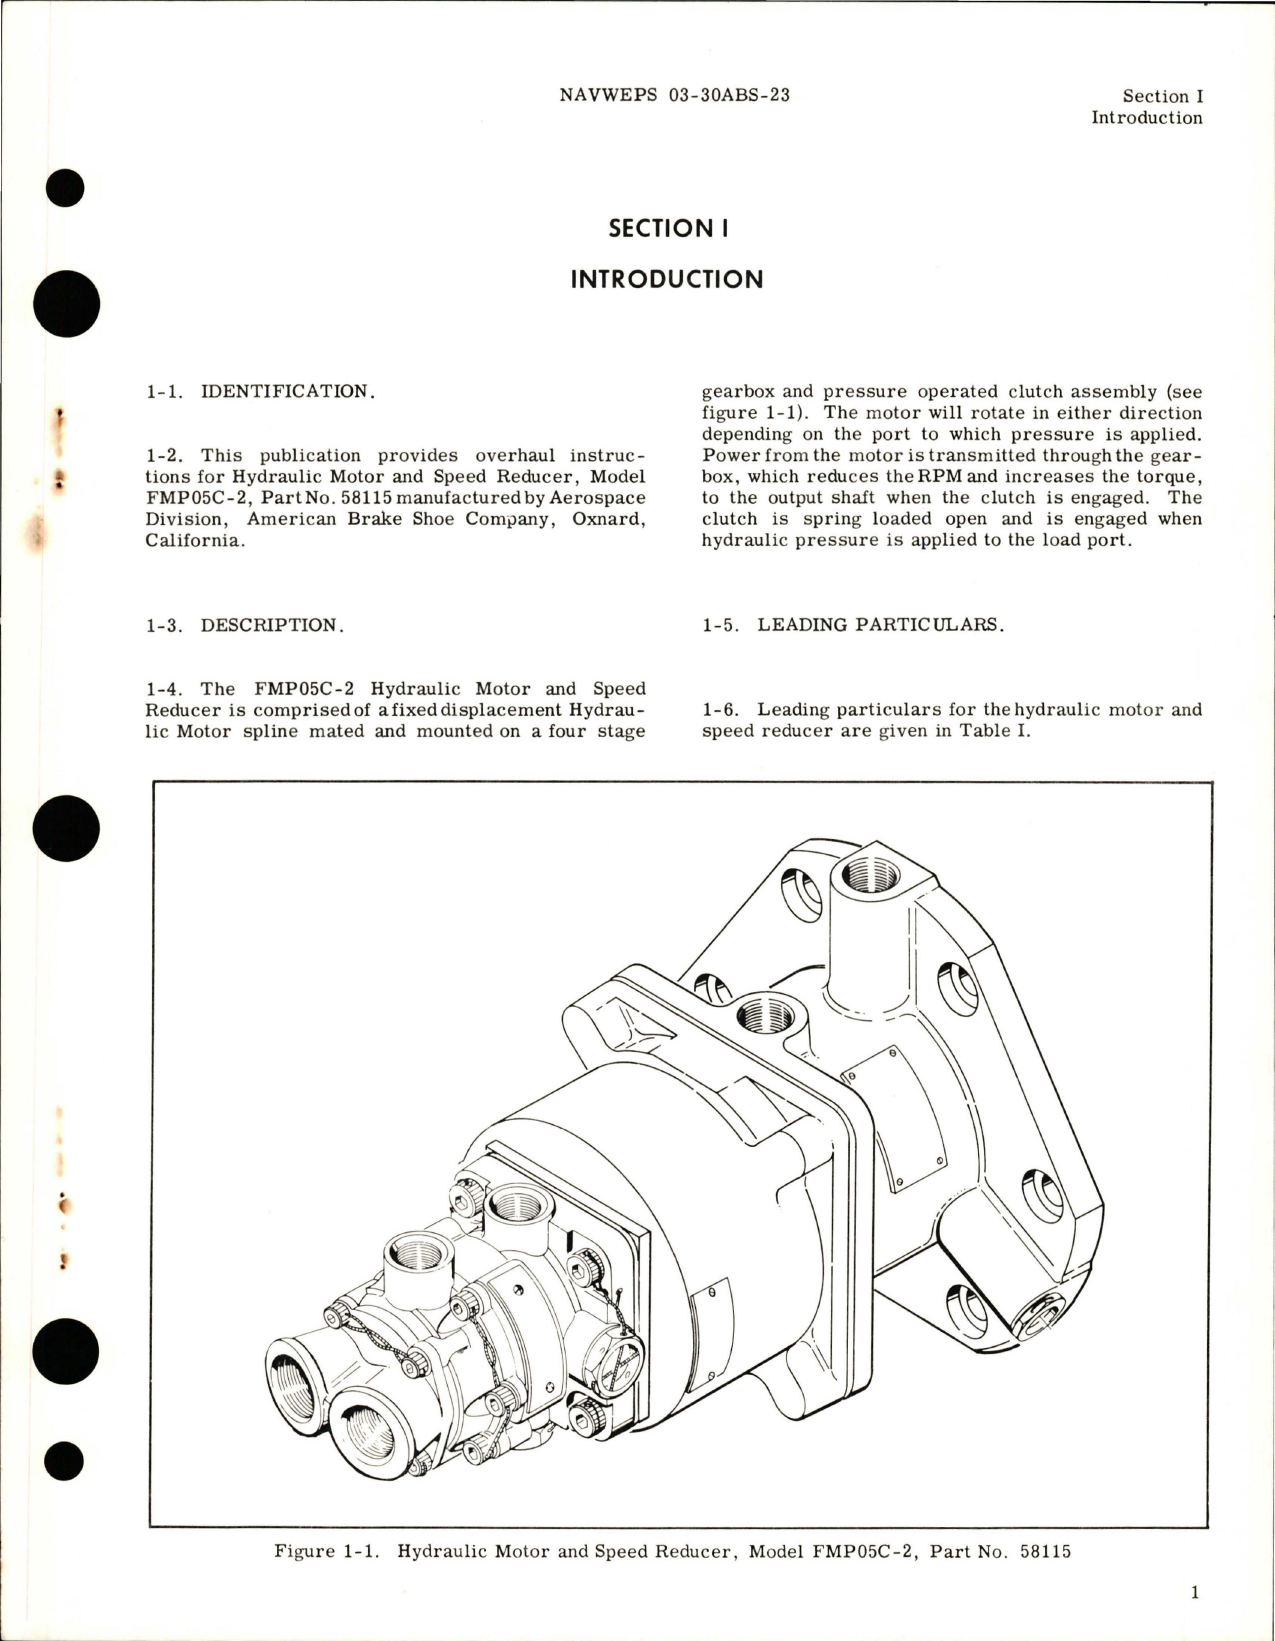 Sample page 5 from AirCorps Library document: Overhaul Instructions for Hydraulic Motor and Speed Reducer - Model FMP05C-2, Part 58115 